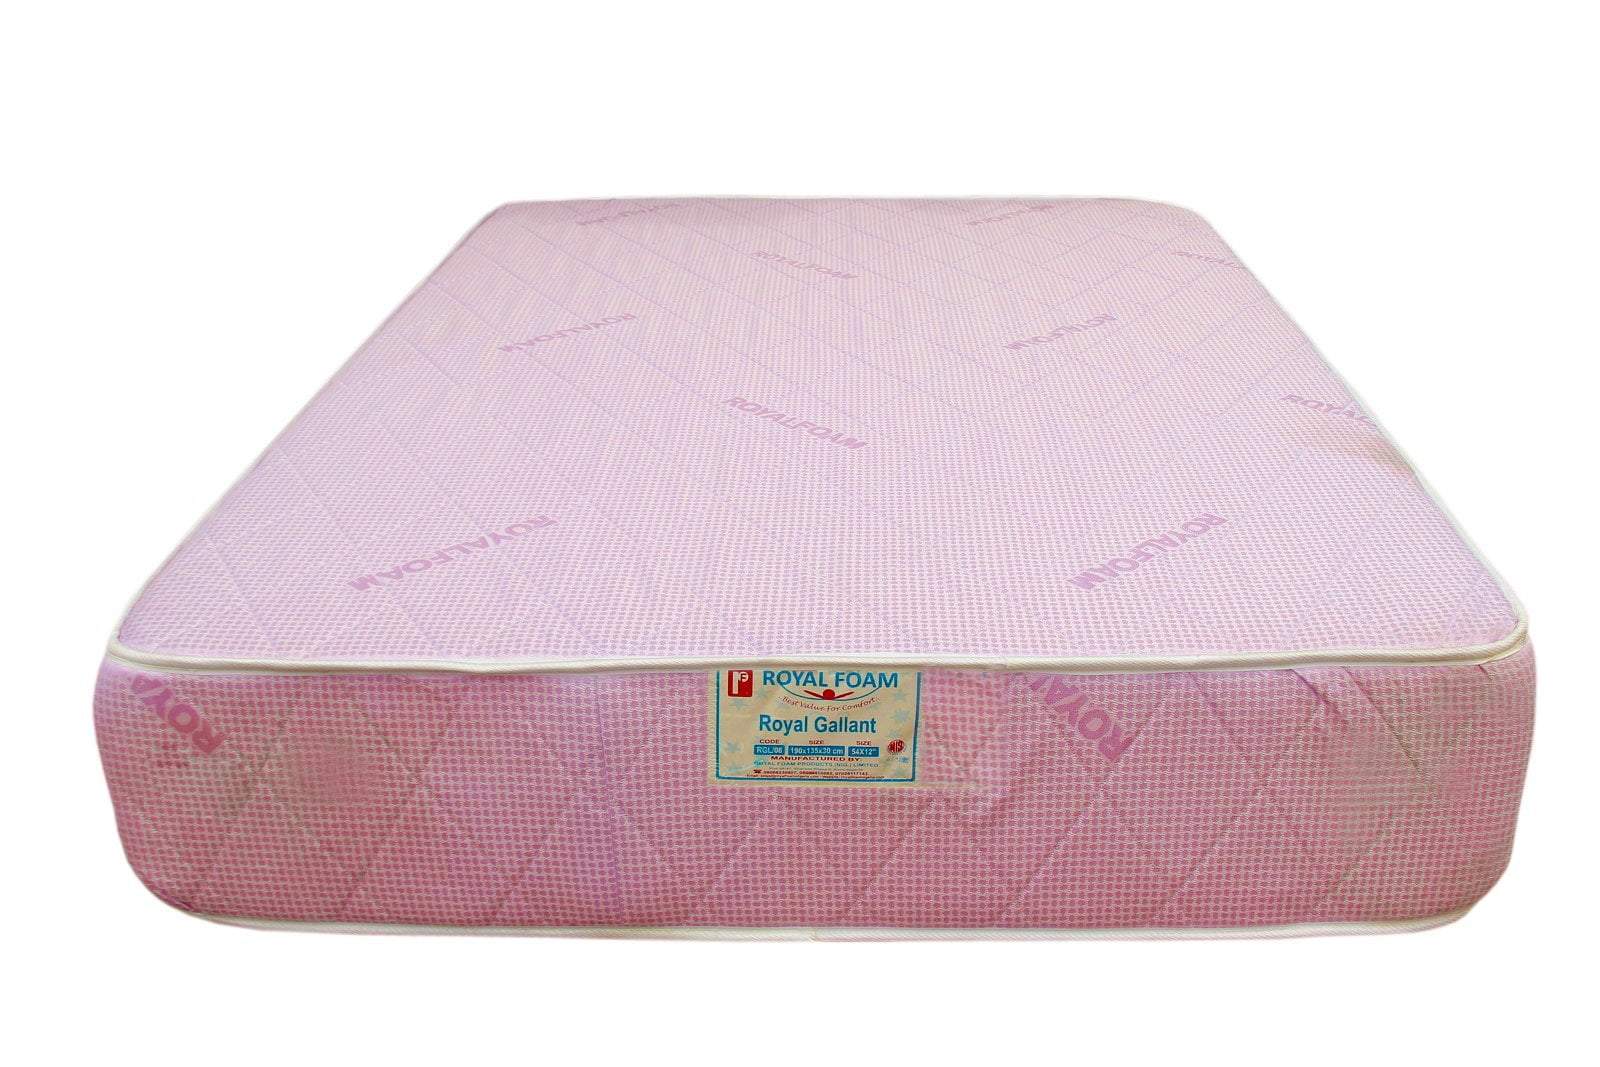 Royal Gallant Plus JACQUARD fabric-Fully Quilted Mattress 190 X 135 X 20 CM(6ft x 4.5ft x 8inches) Single(Lagos Only)